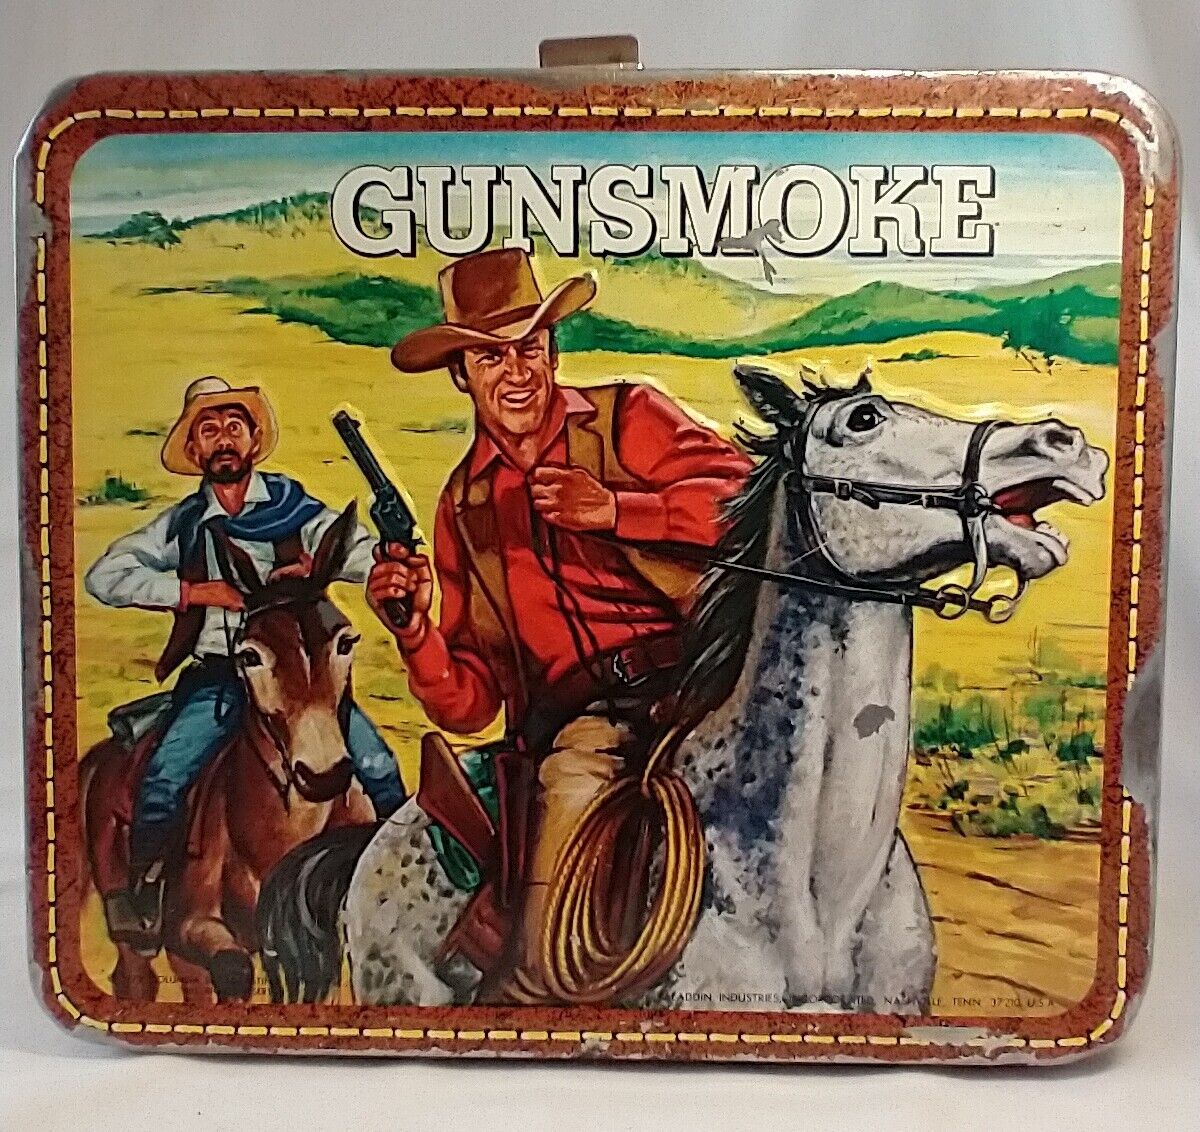 Vintage 1972 Embossed Metal Gunsmoke Lunchbox by Aladdin No Thermos Dented READ